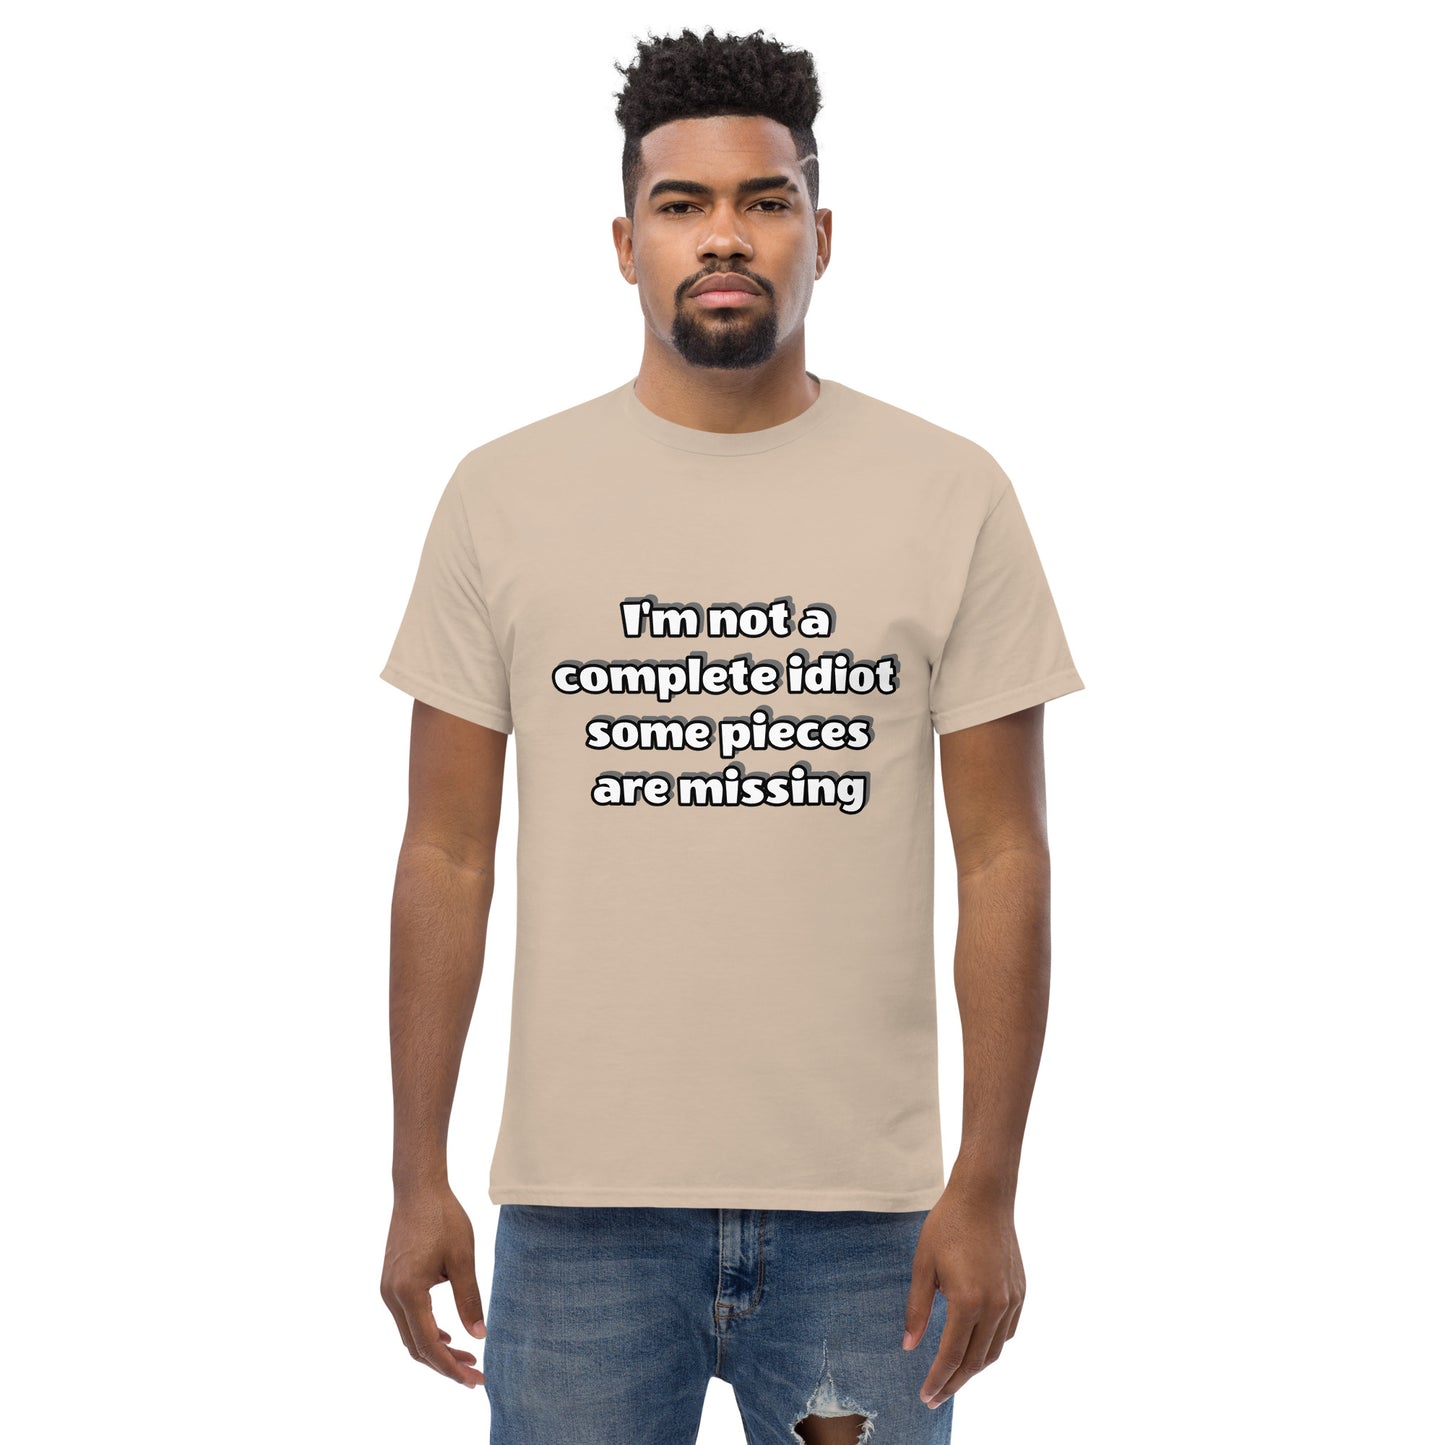 Men with sand t-shirt with text “I’m not a complete idiot, some pieces are missing”